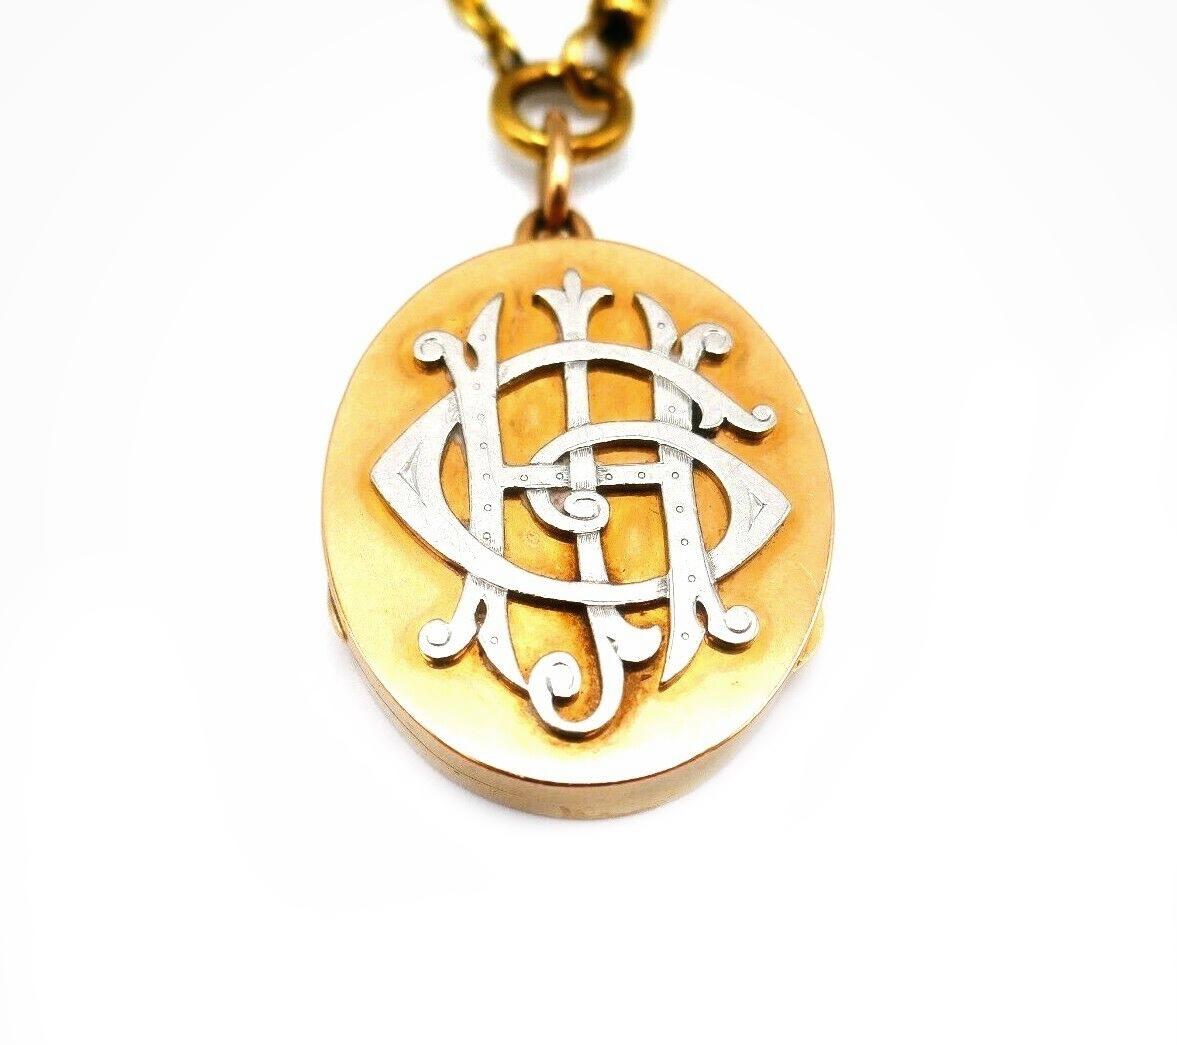 A stylish Antique locket made of 14k (tested) rose gold topped with a white gold lettering motif. Features a 18k (tested) yellow gold rope watch chain necklace. Can be sold separate.
Measurements: the locket is 2